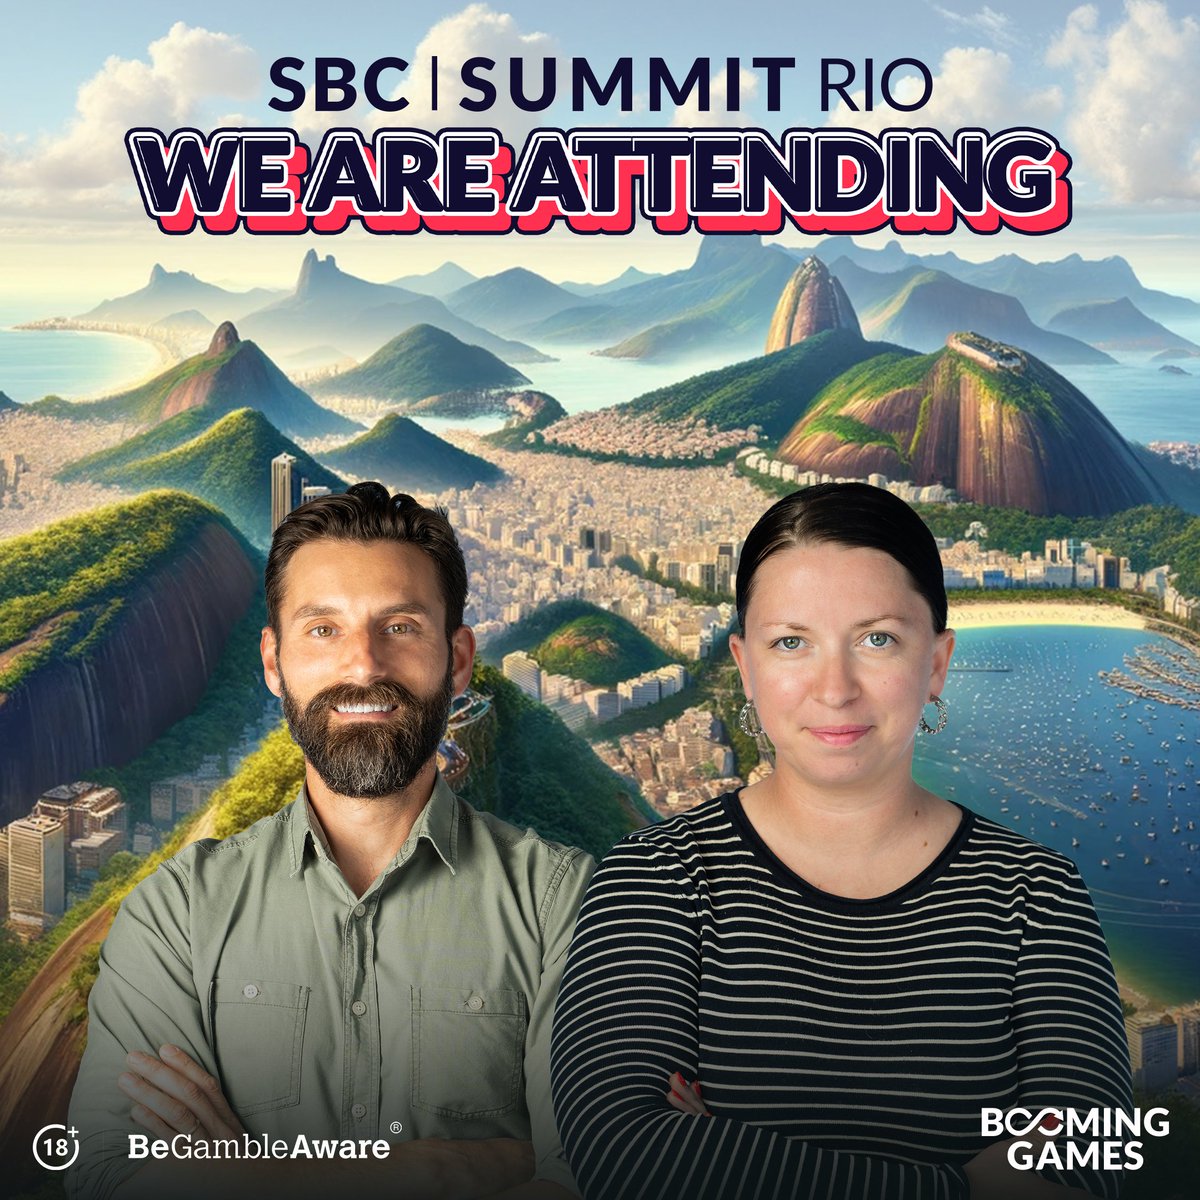 With SBC Summit Rio just around the corner, there's no time to waste! Reach out to Aaron for all your sales and commercial needs. #igaming #slots #slotonline #games #slotgame #videoslot #casino #games #casinogames #iGaming #SBCRio #Summit #Event